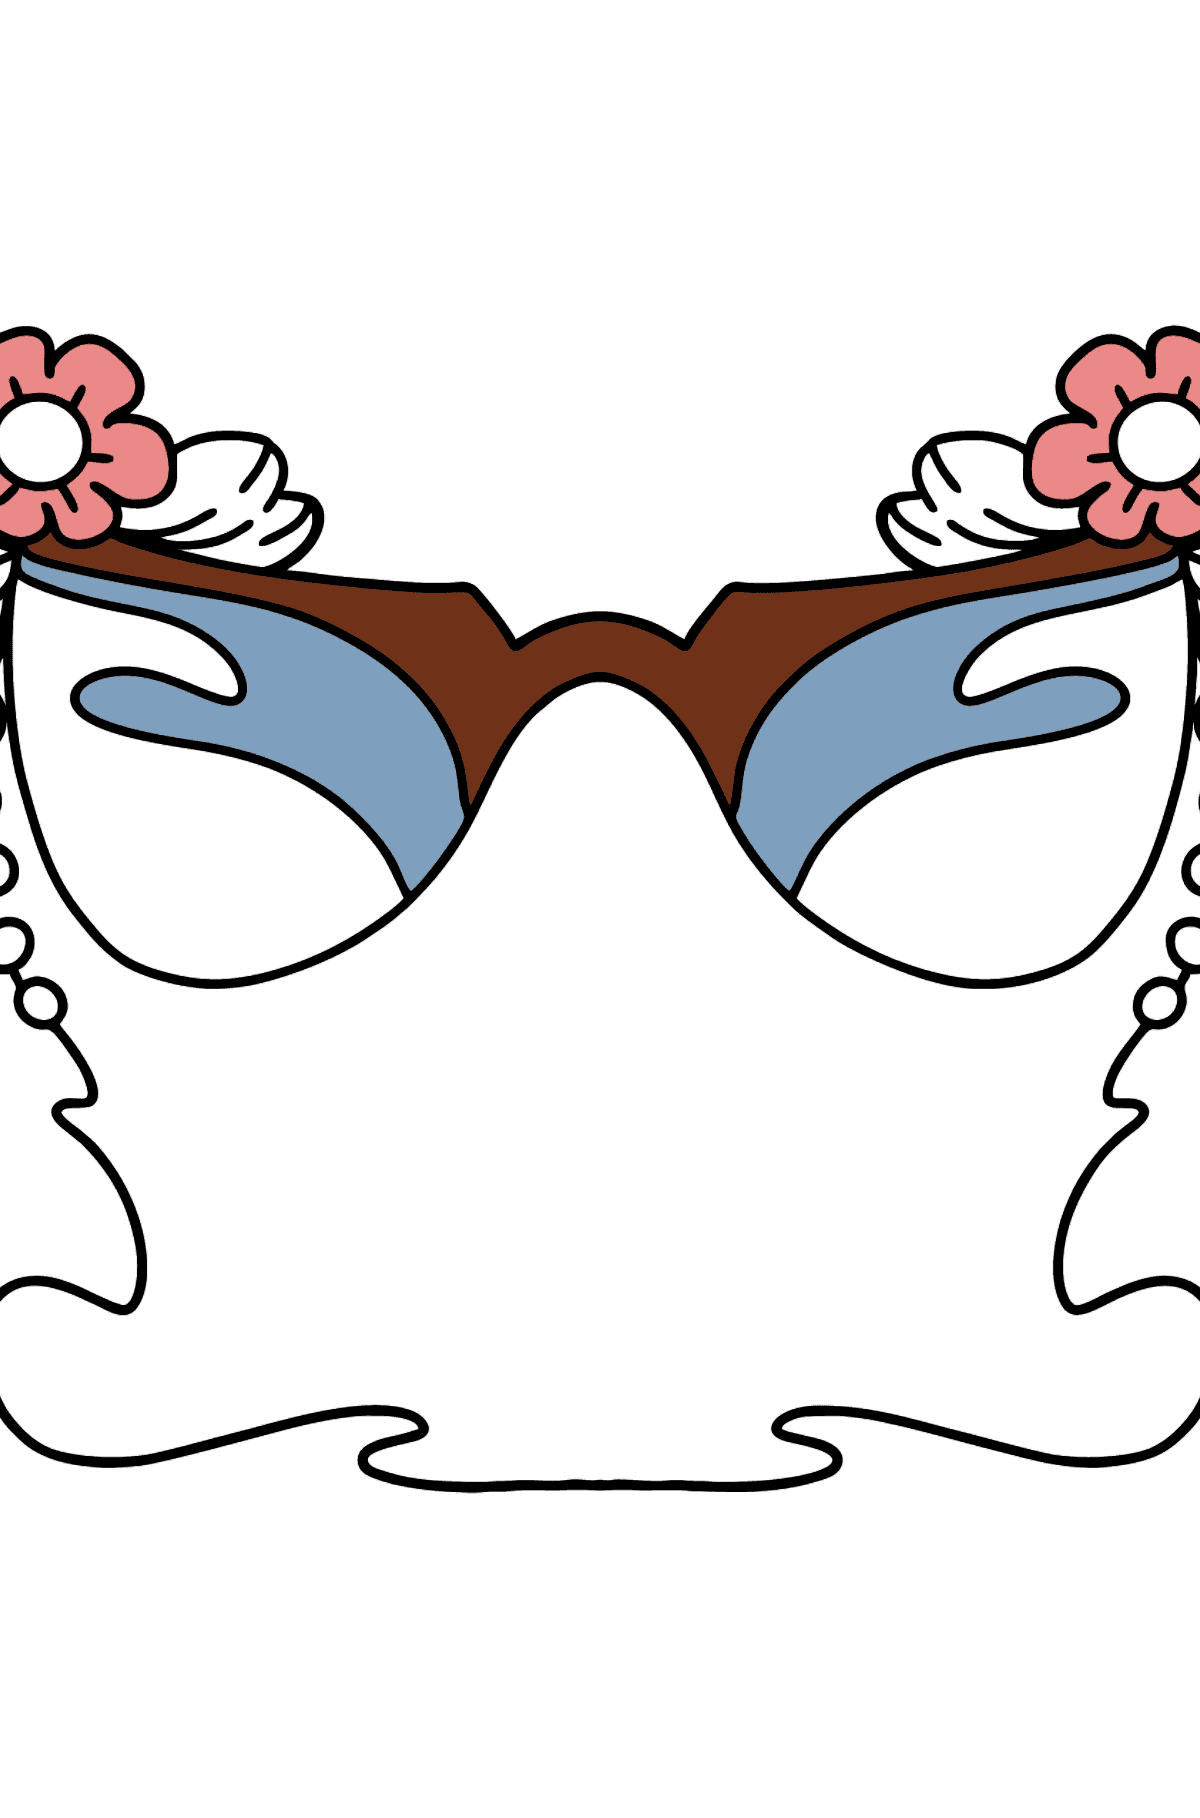 Coloring page with glasses - Coloring Pages for Kids